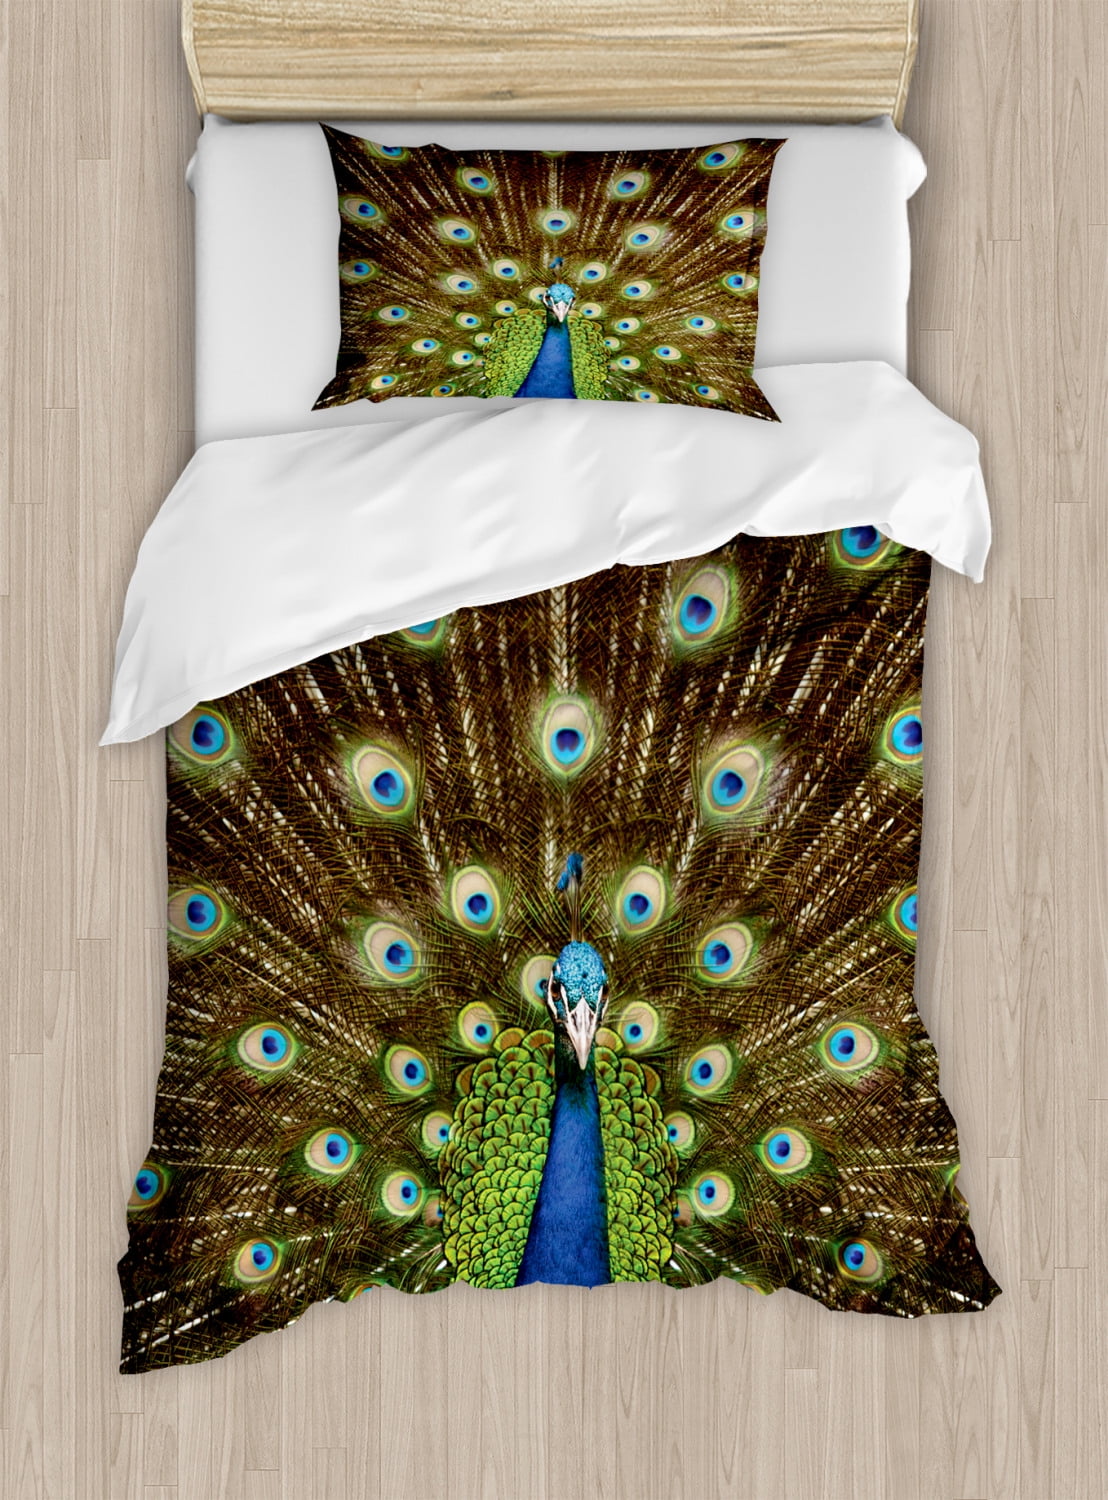 Peacock Duvet Cover Set, Portrait of Peacock with Feathers out Vibrant ...